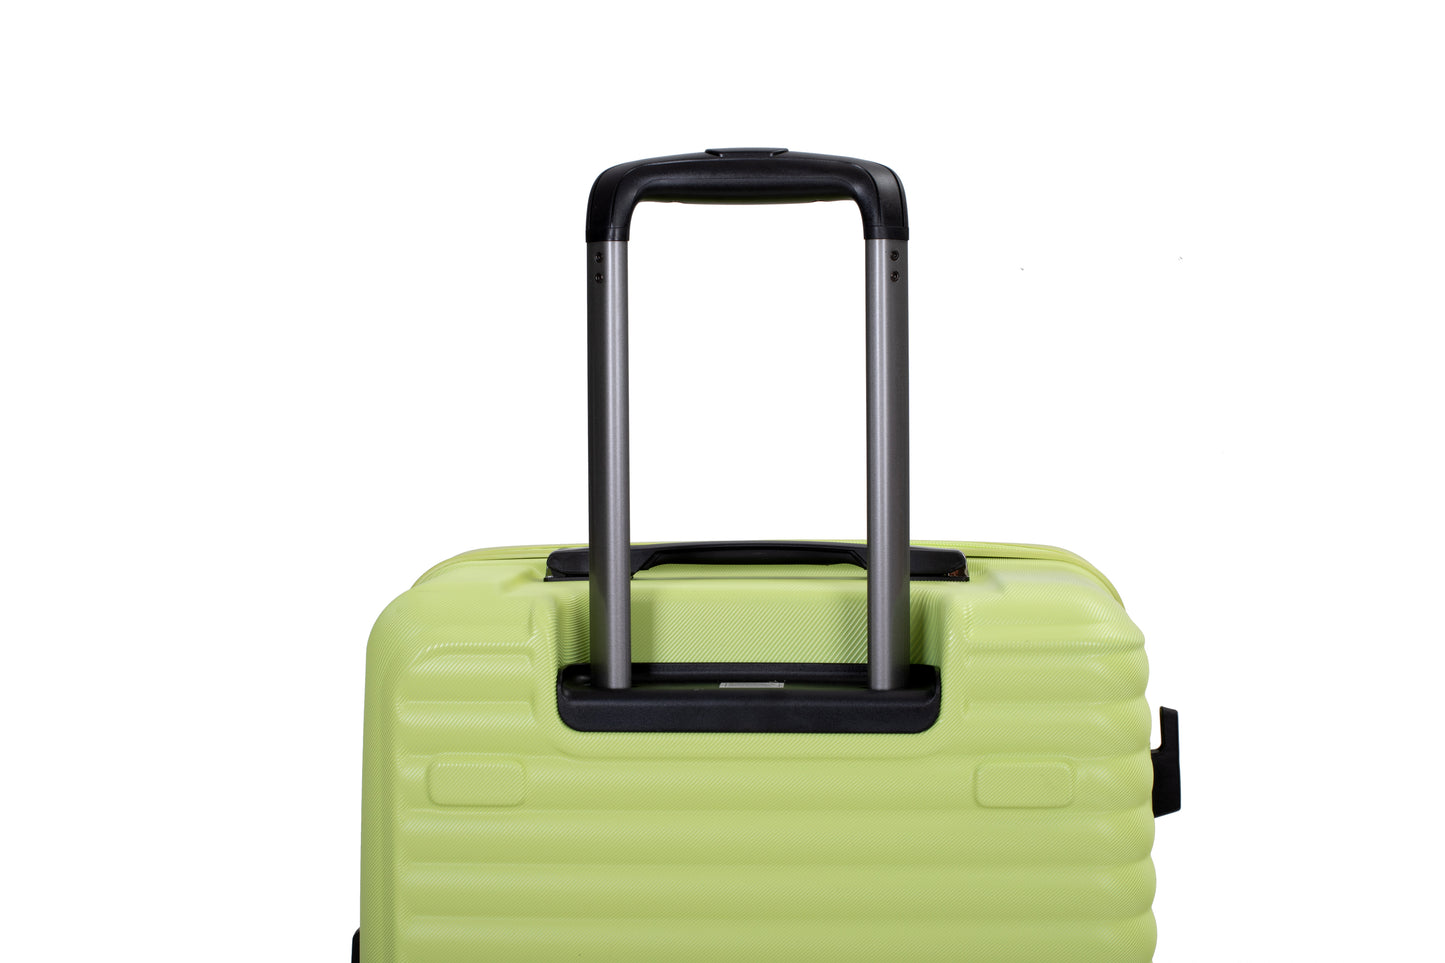 3 Piece Luggage Sets PC+ABS Lightweight Suitcase with Two Hooks, 360° Double Spinner Wheels, TSA Lock, (20/24/28) Light Green